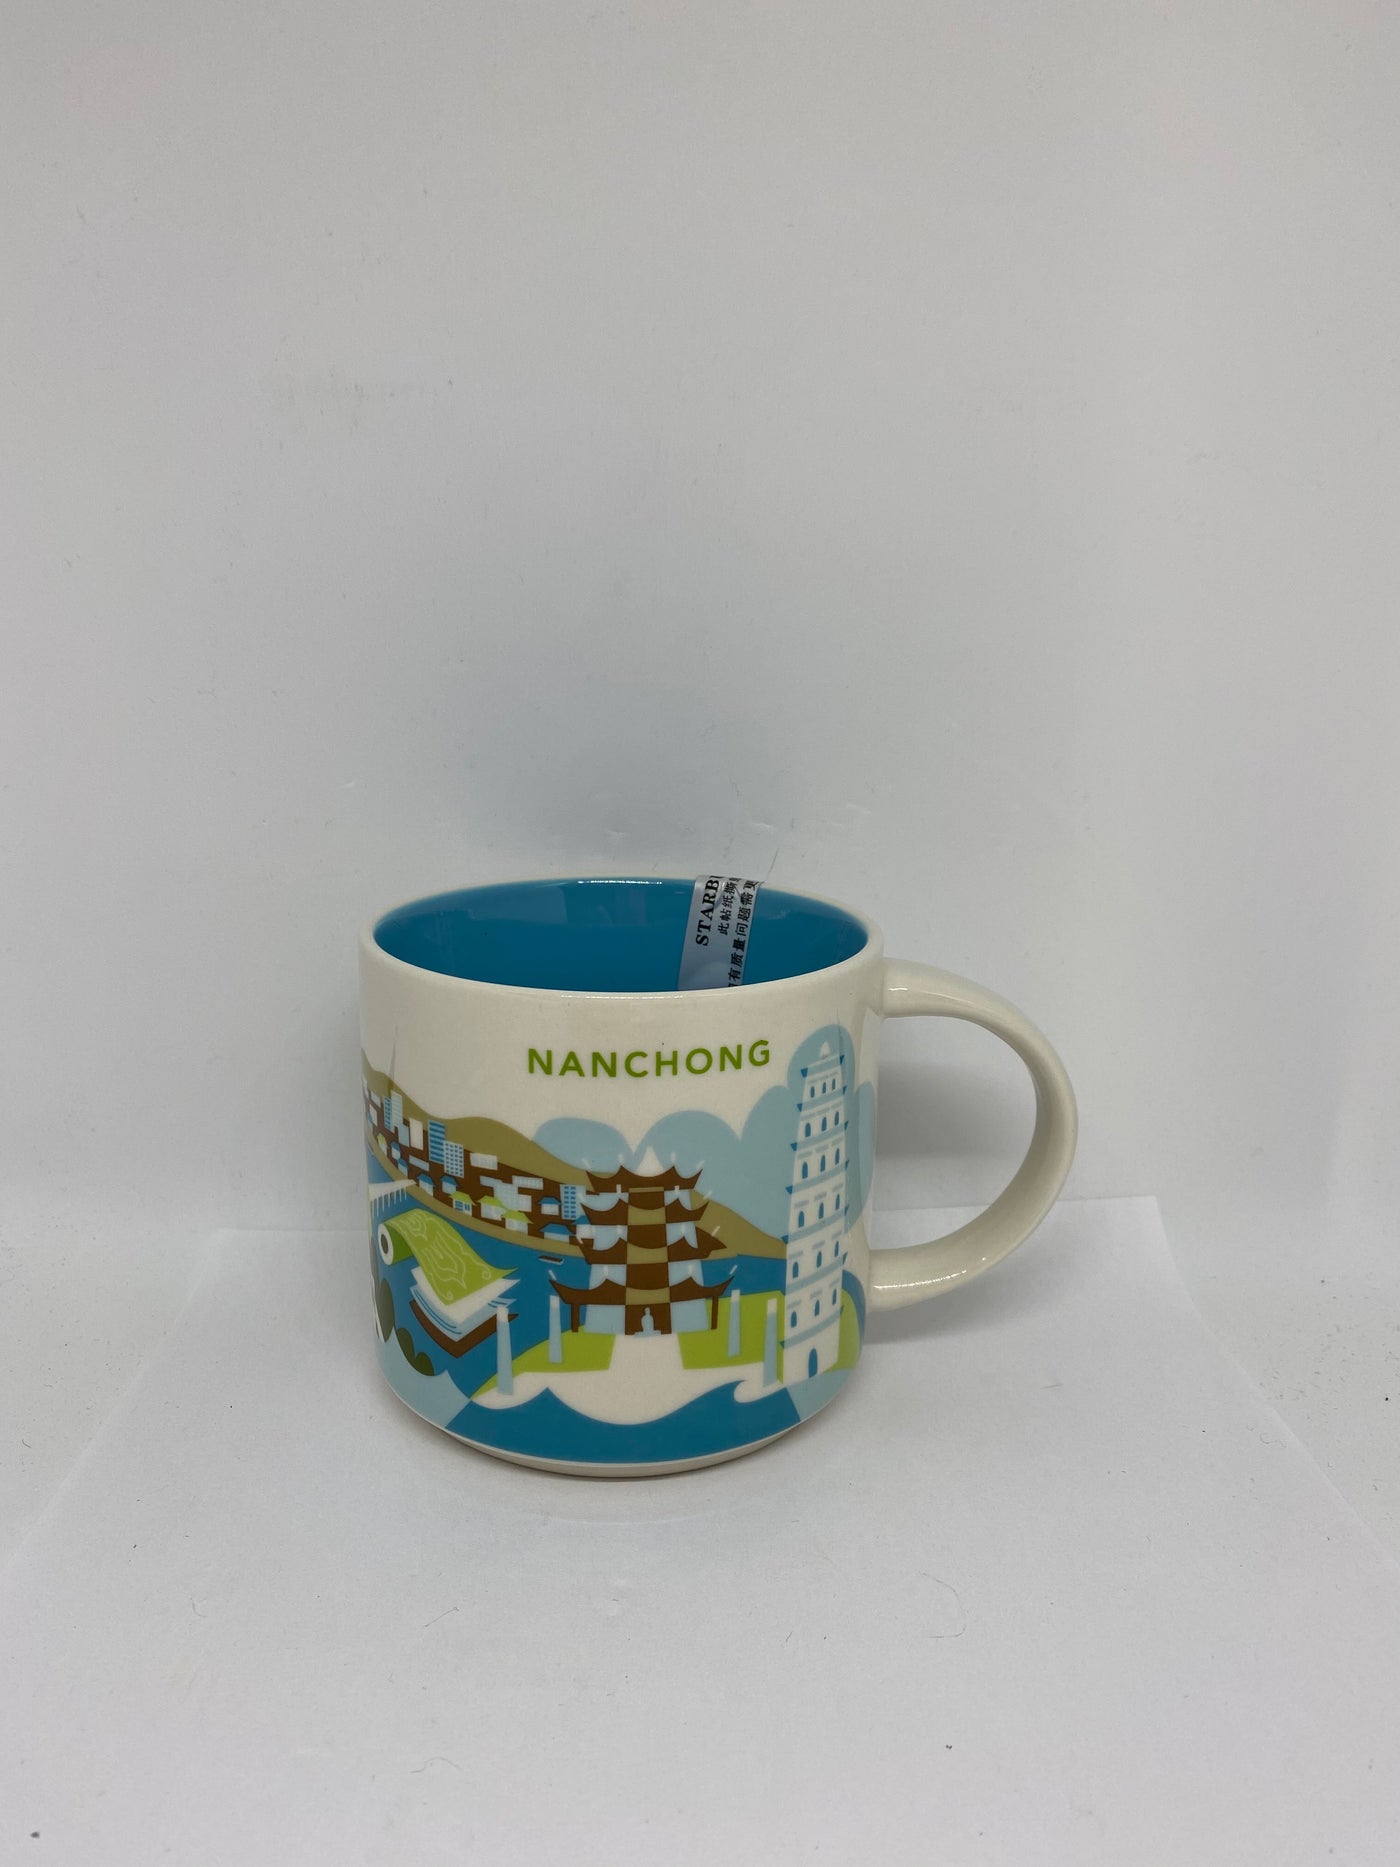 Starbucks You Are Here Collection Nanchong China Ceramic Coffee Mug New With Box